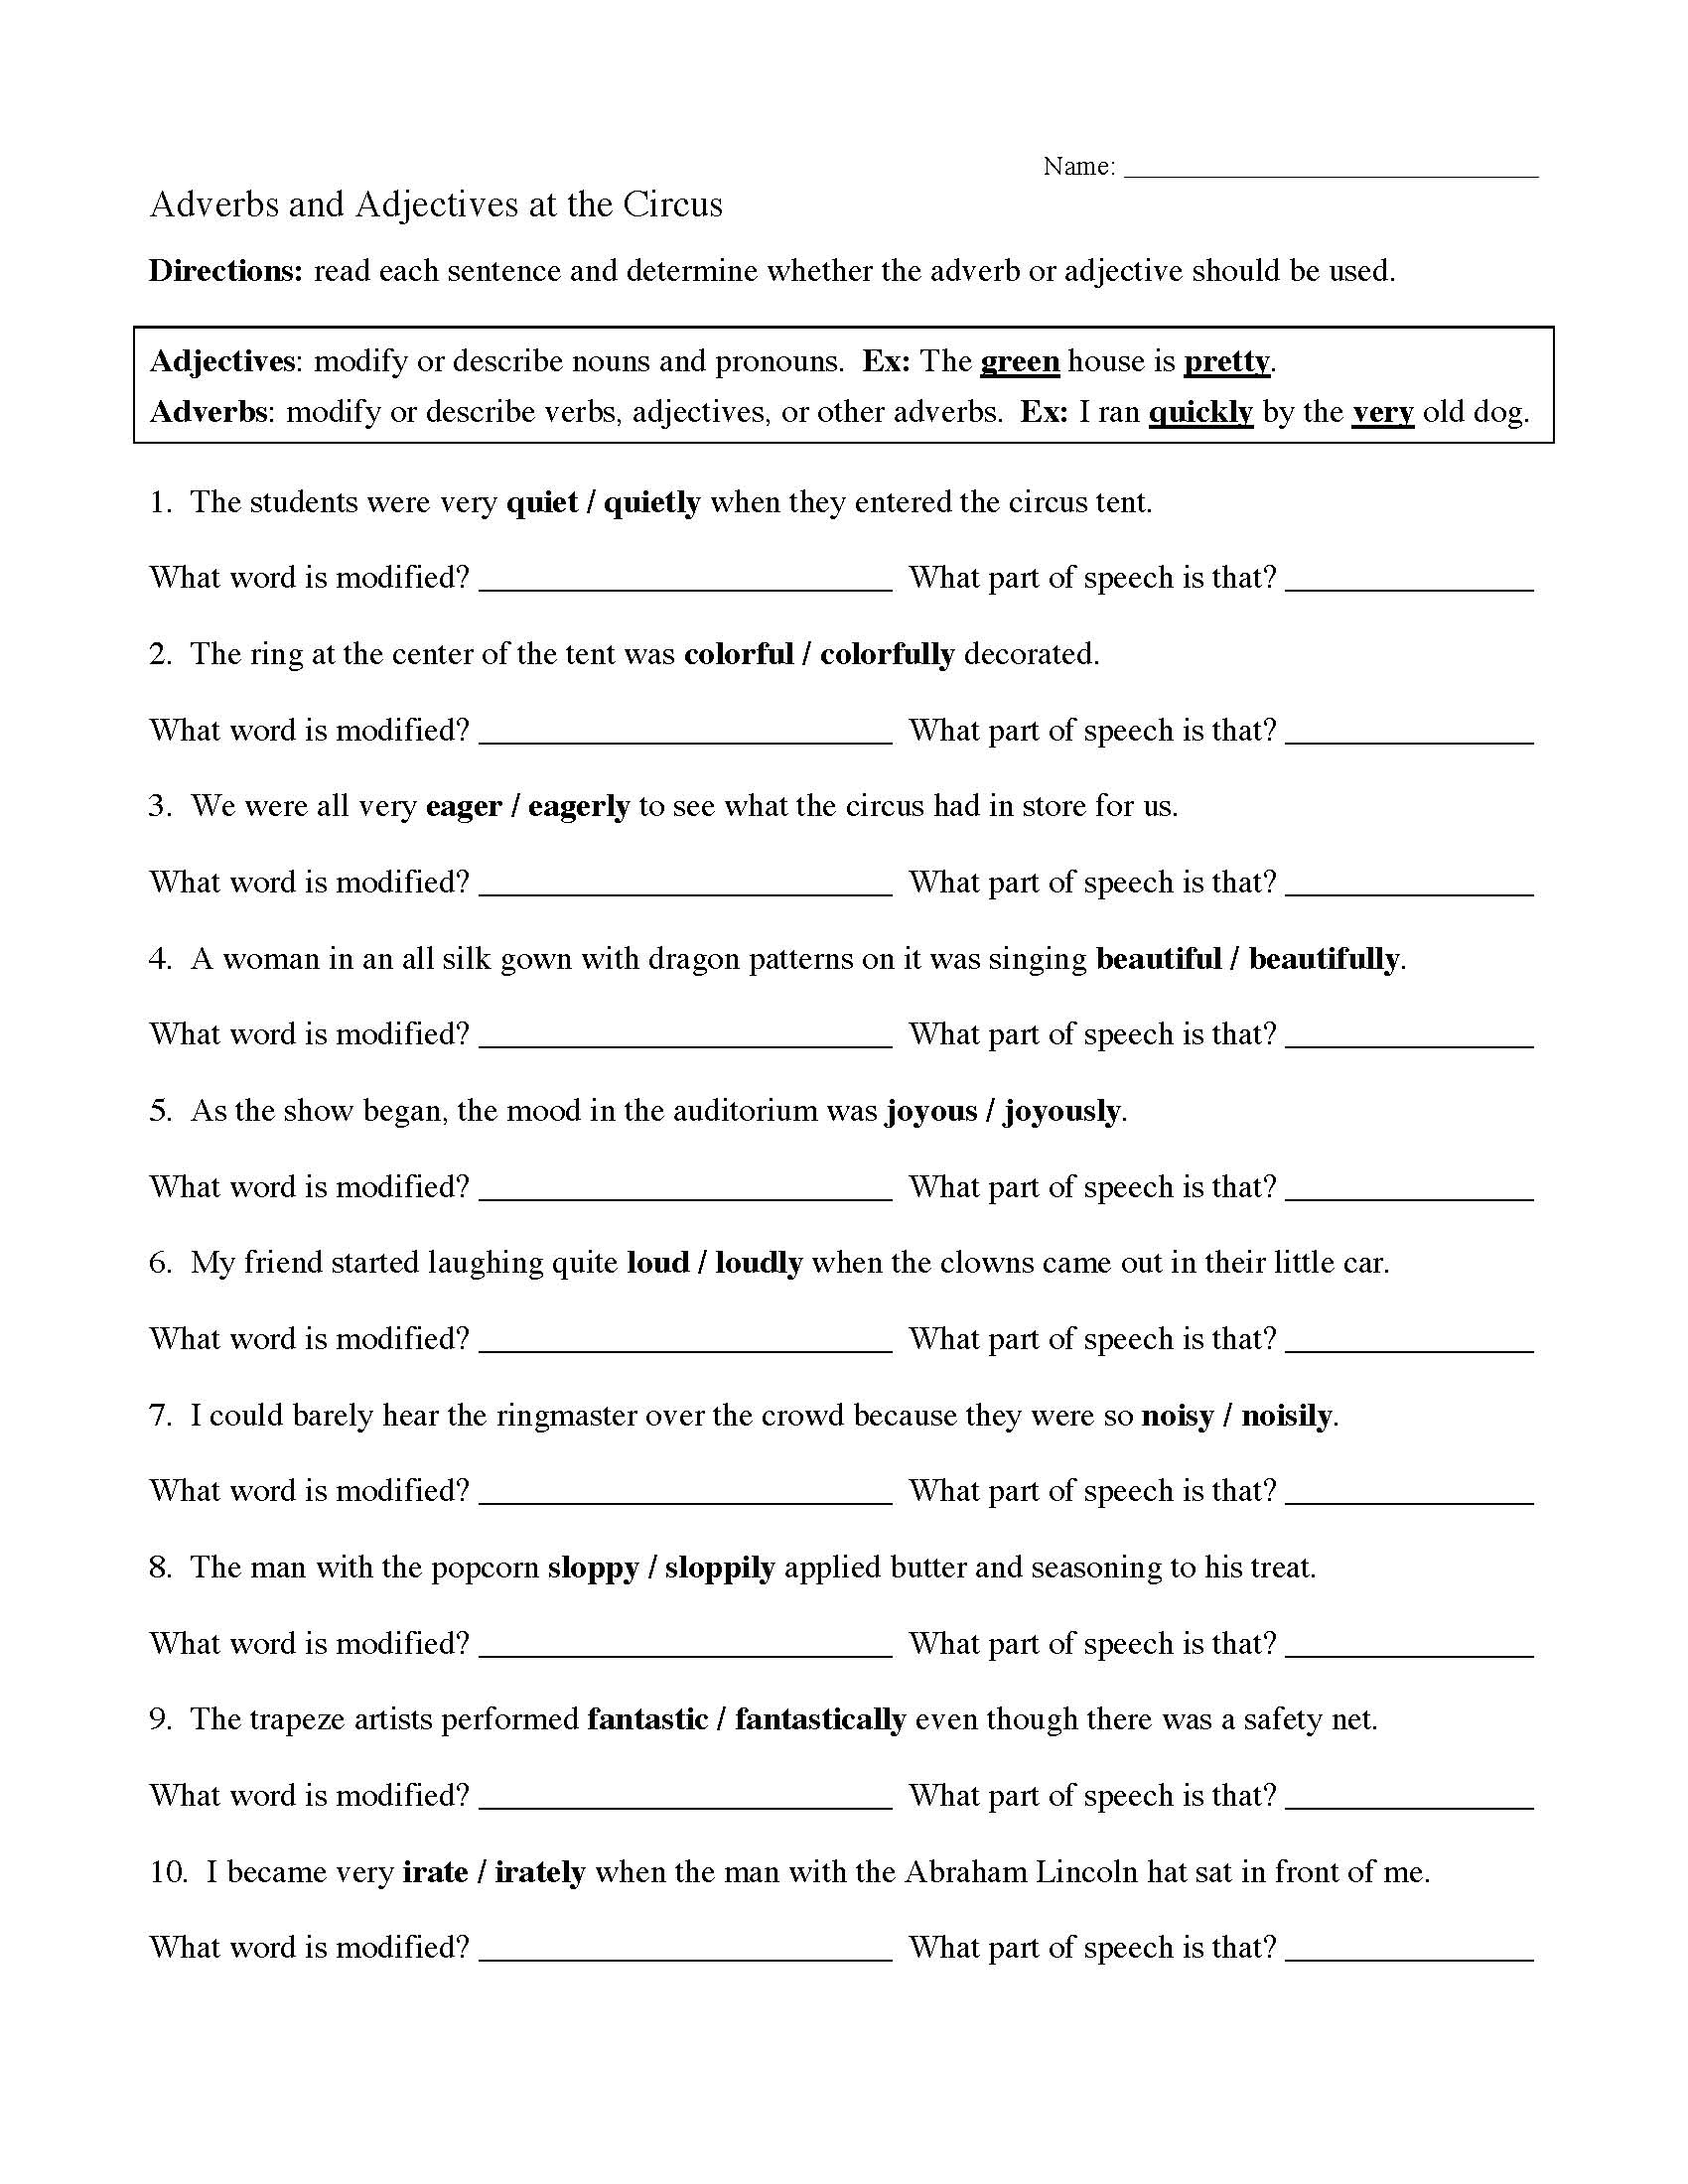 Verbs Adverbs And Adjectives Worksheet